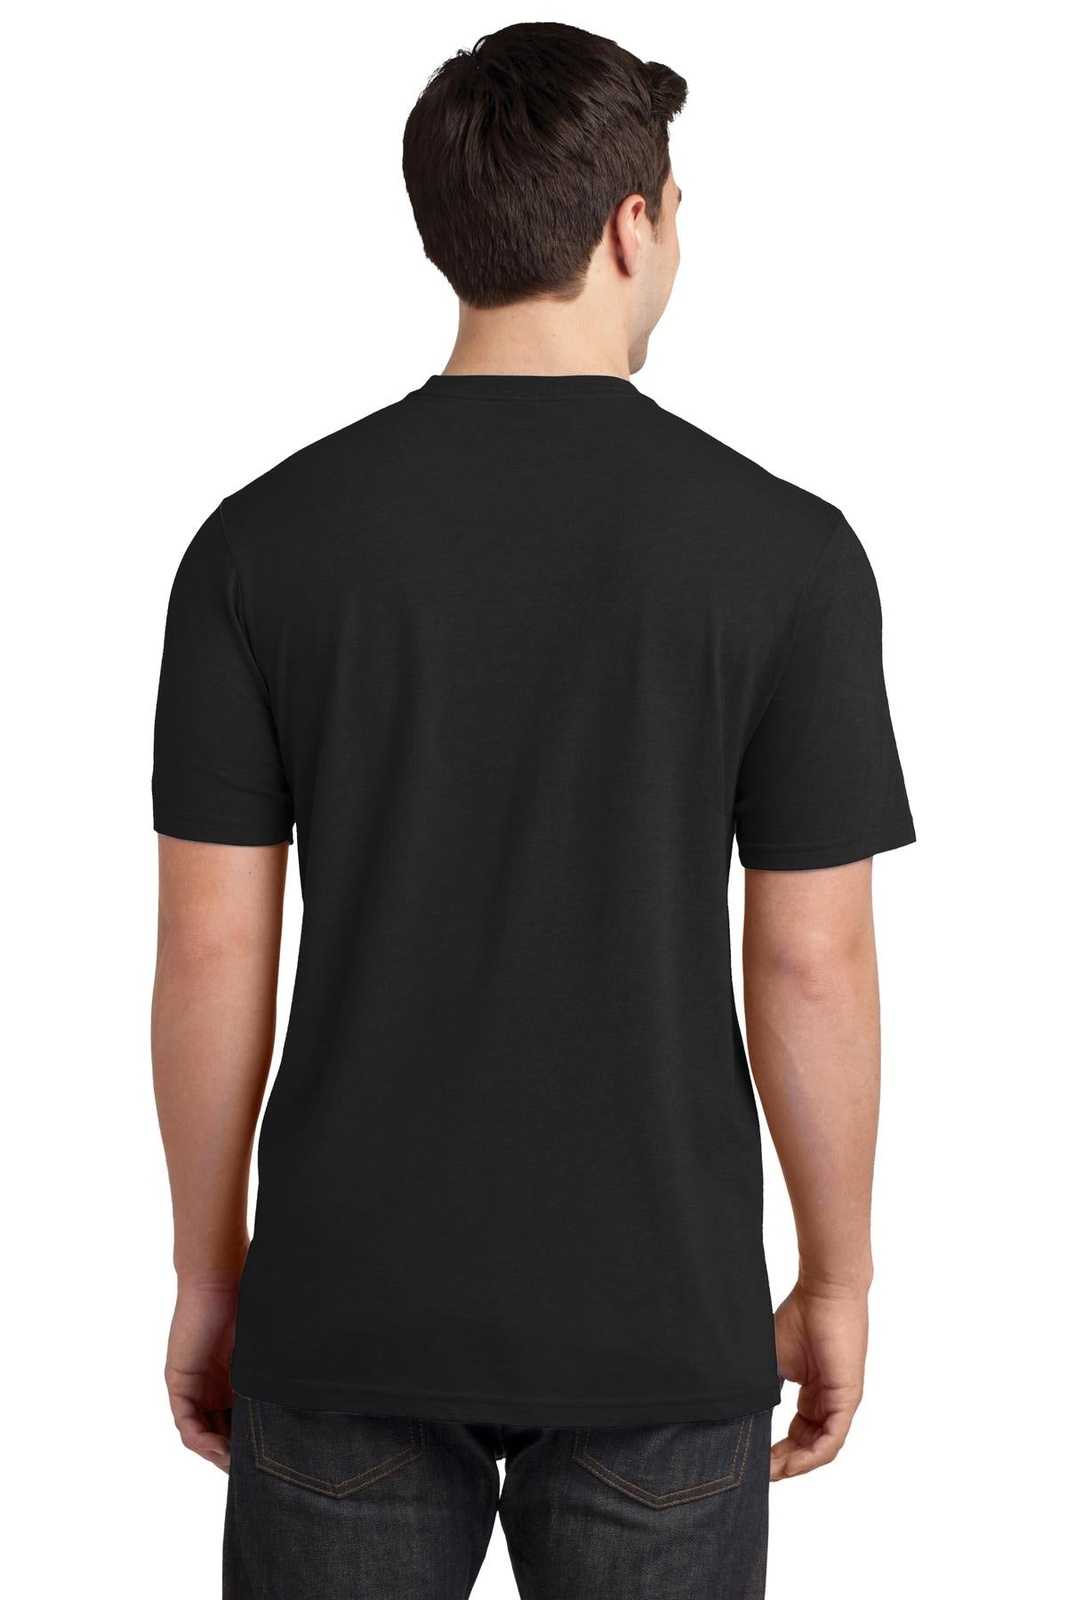 District DT6000P Very Important Tee with Pocket - Black - HIT a Double - 1